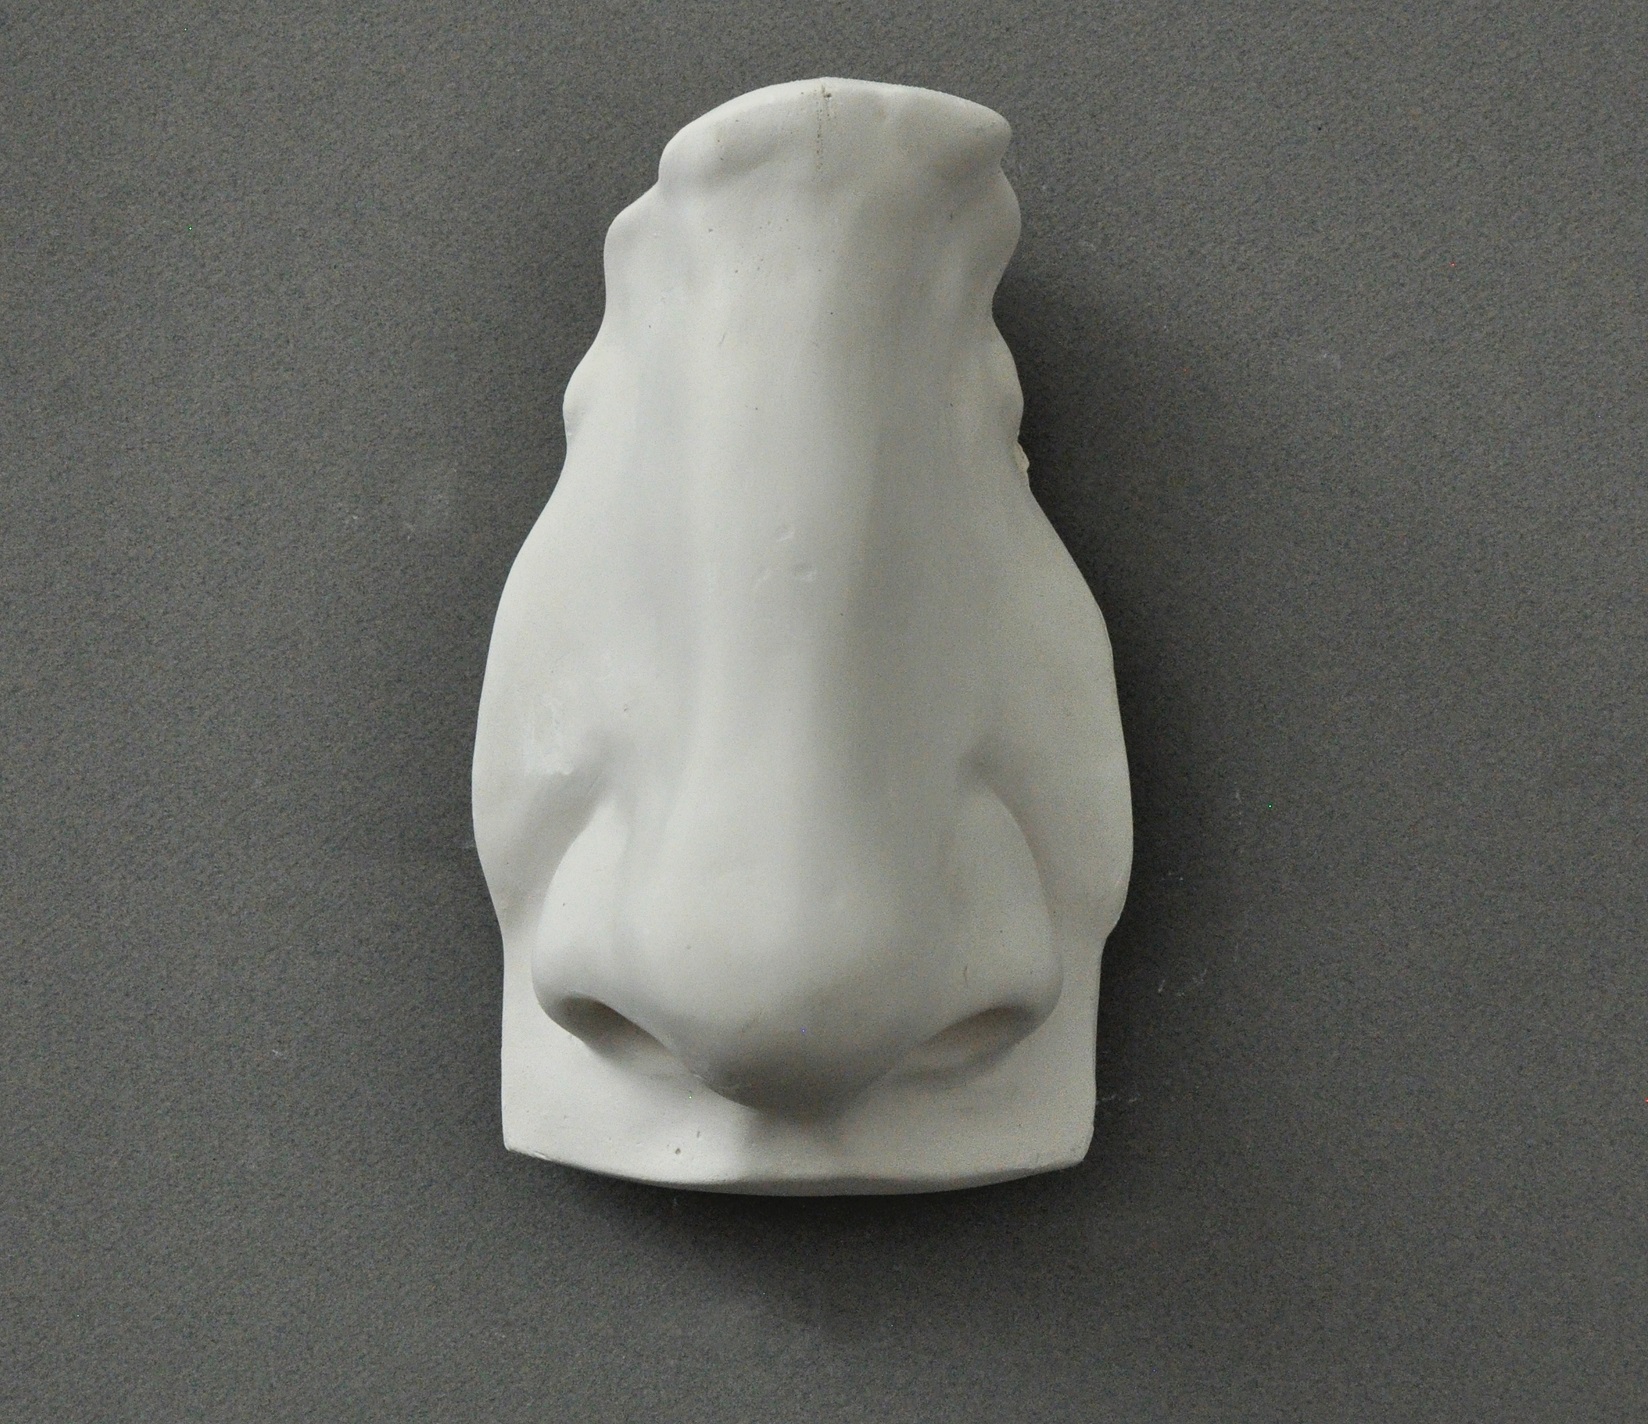 Plaster cast of Michelangelos David nose, used in traditional drawing courses